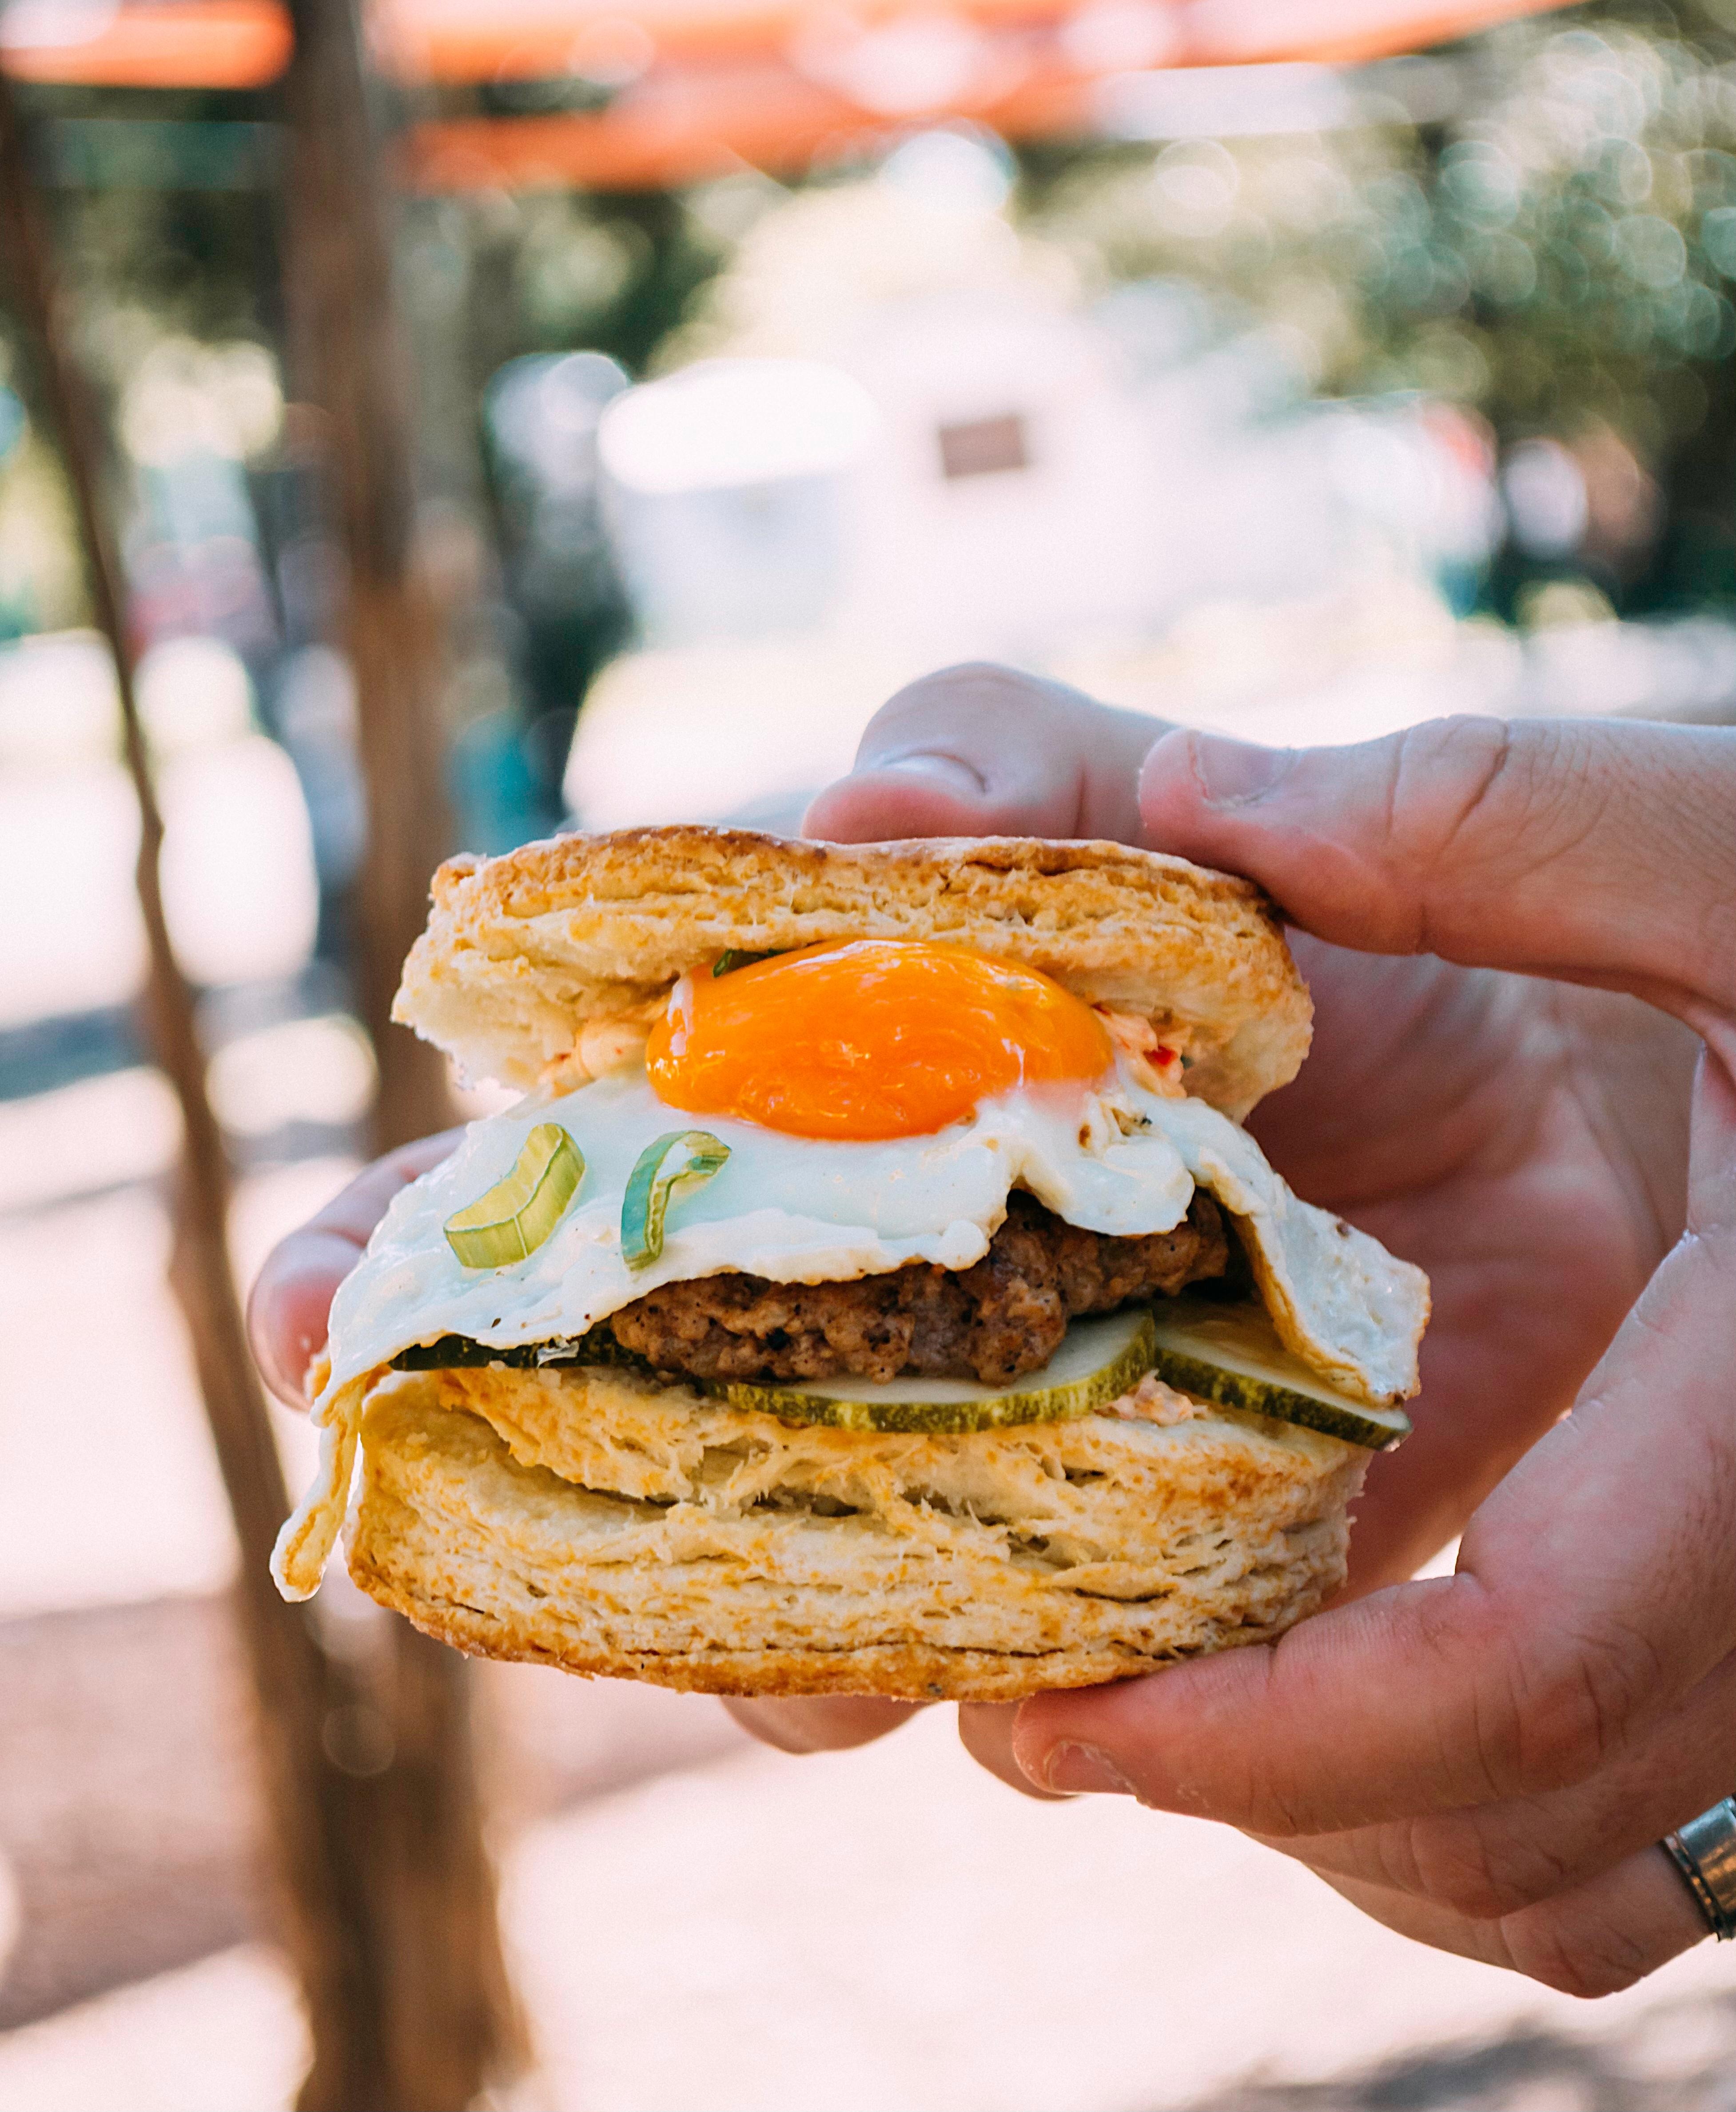 Fennel Sausage, Charred Fresno Pimento, House Pickles, Sunny Egg, on our Whey biscuits